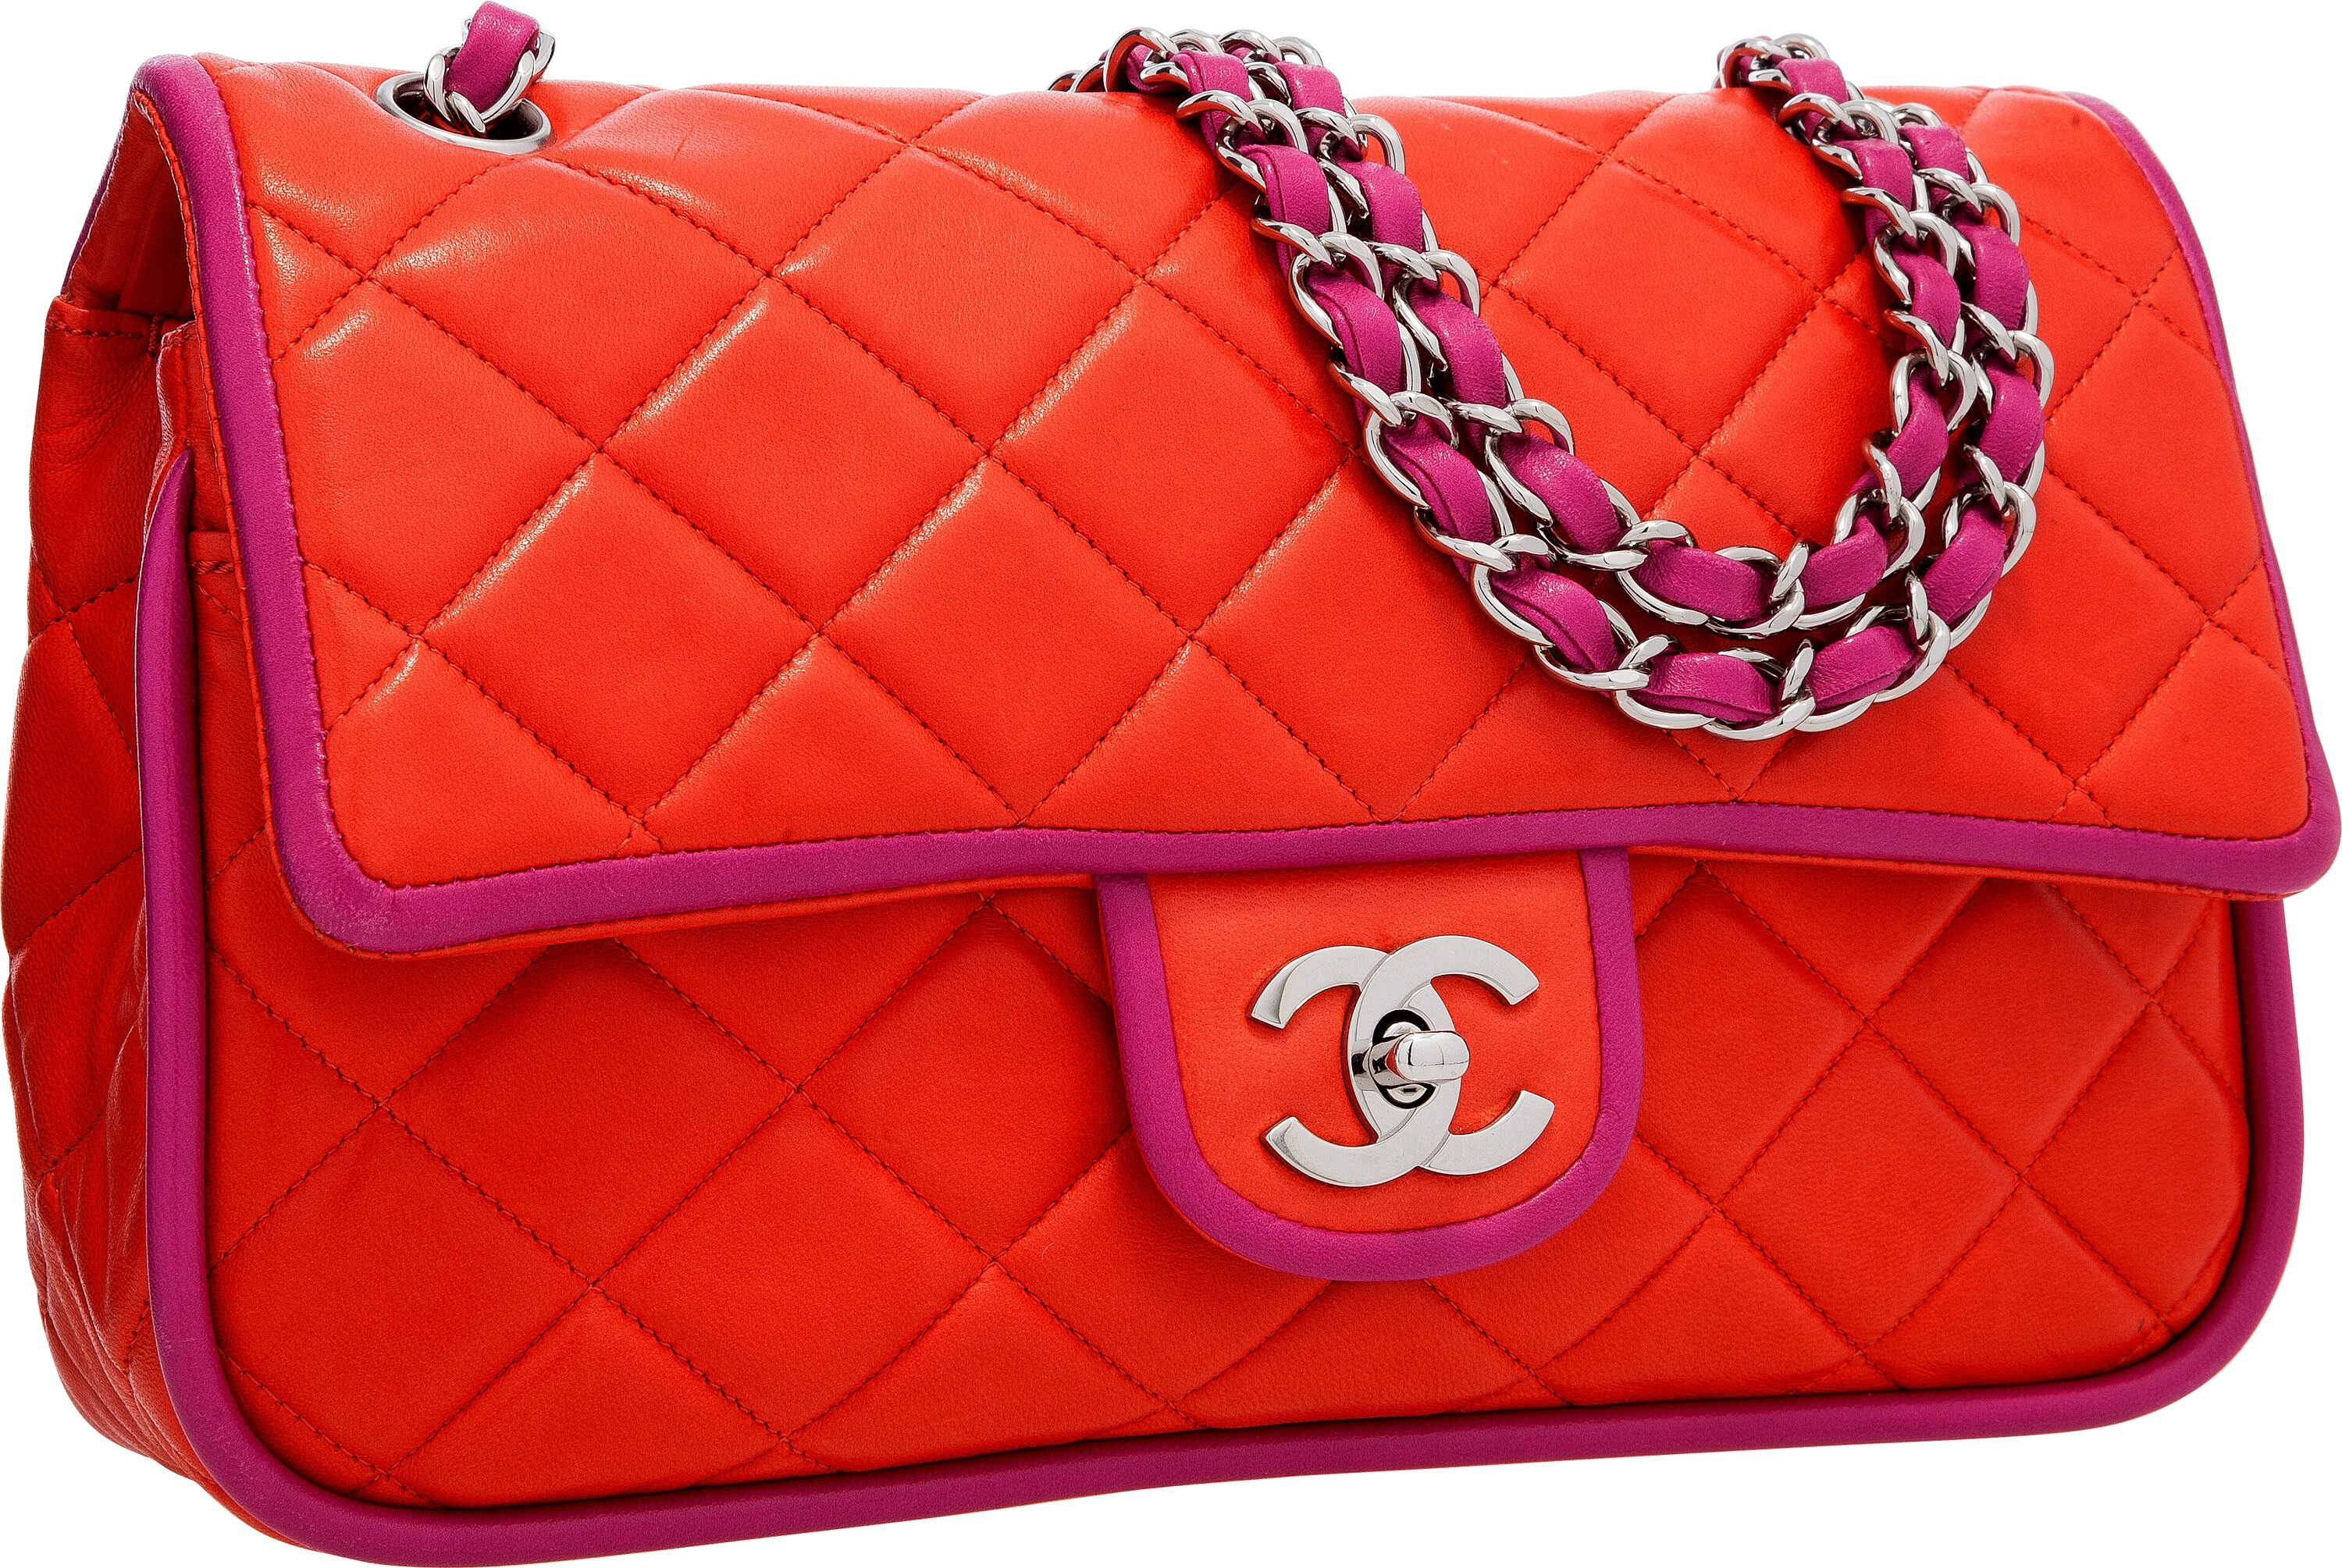 Chanel Coral & Fuchsia Quilted Lambskin Leather Double Flap Bag